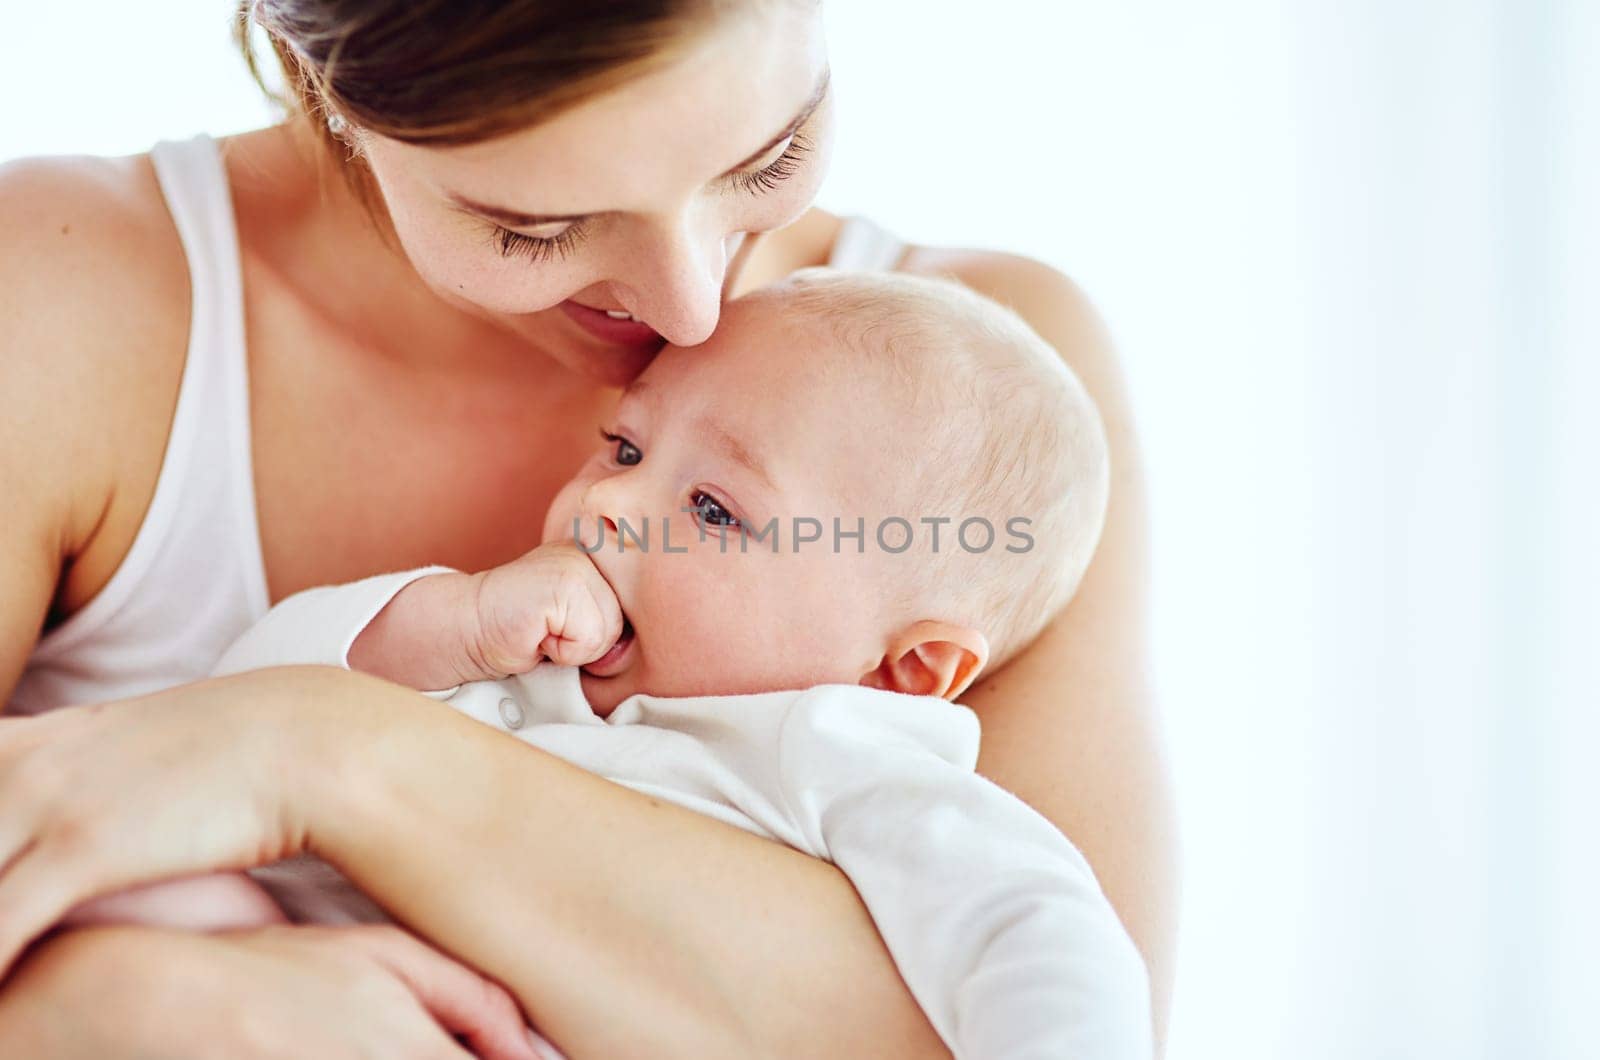 Shot of an adorable baby boy bonding with his mother at home.